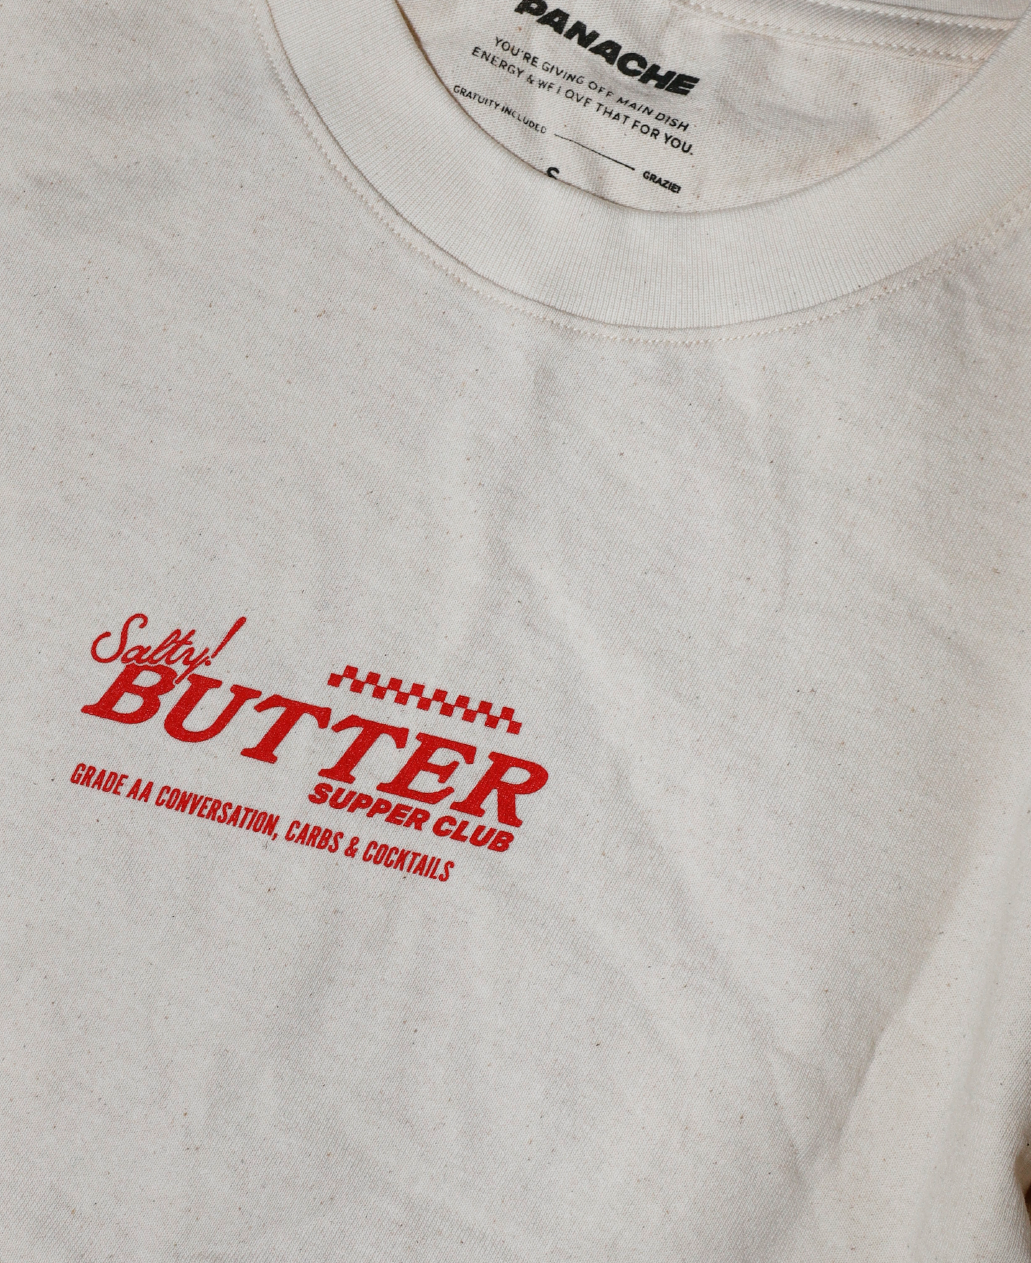 Our Bread & Butter Tee